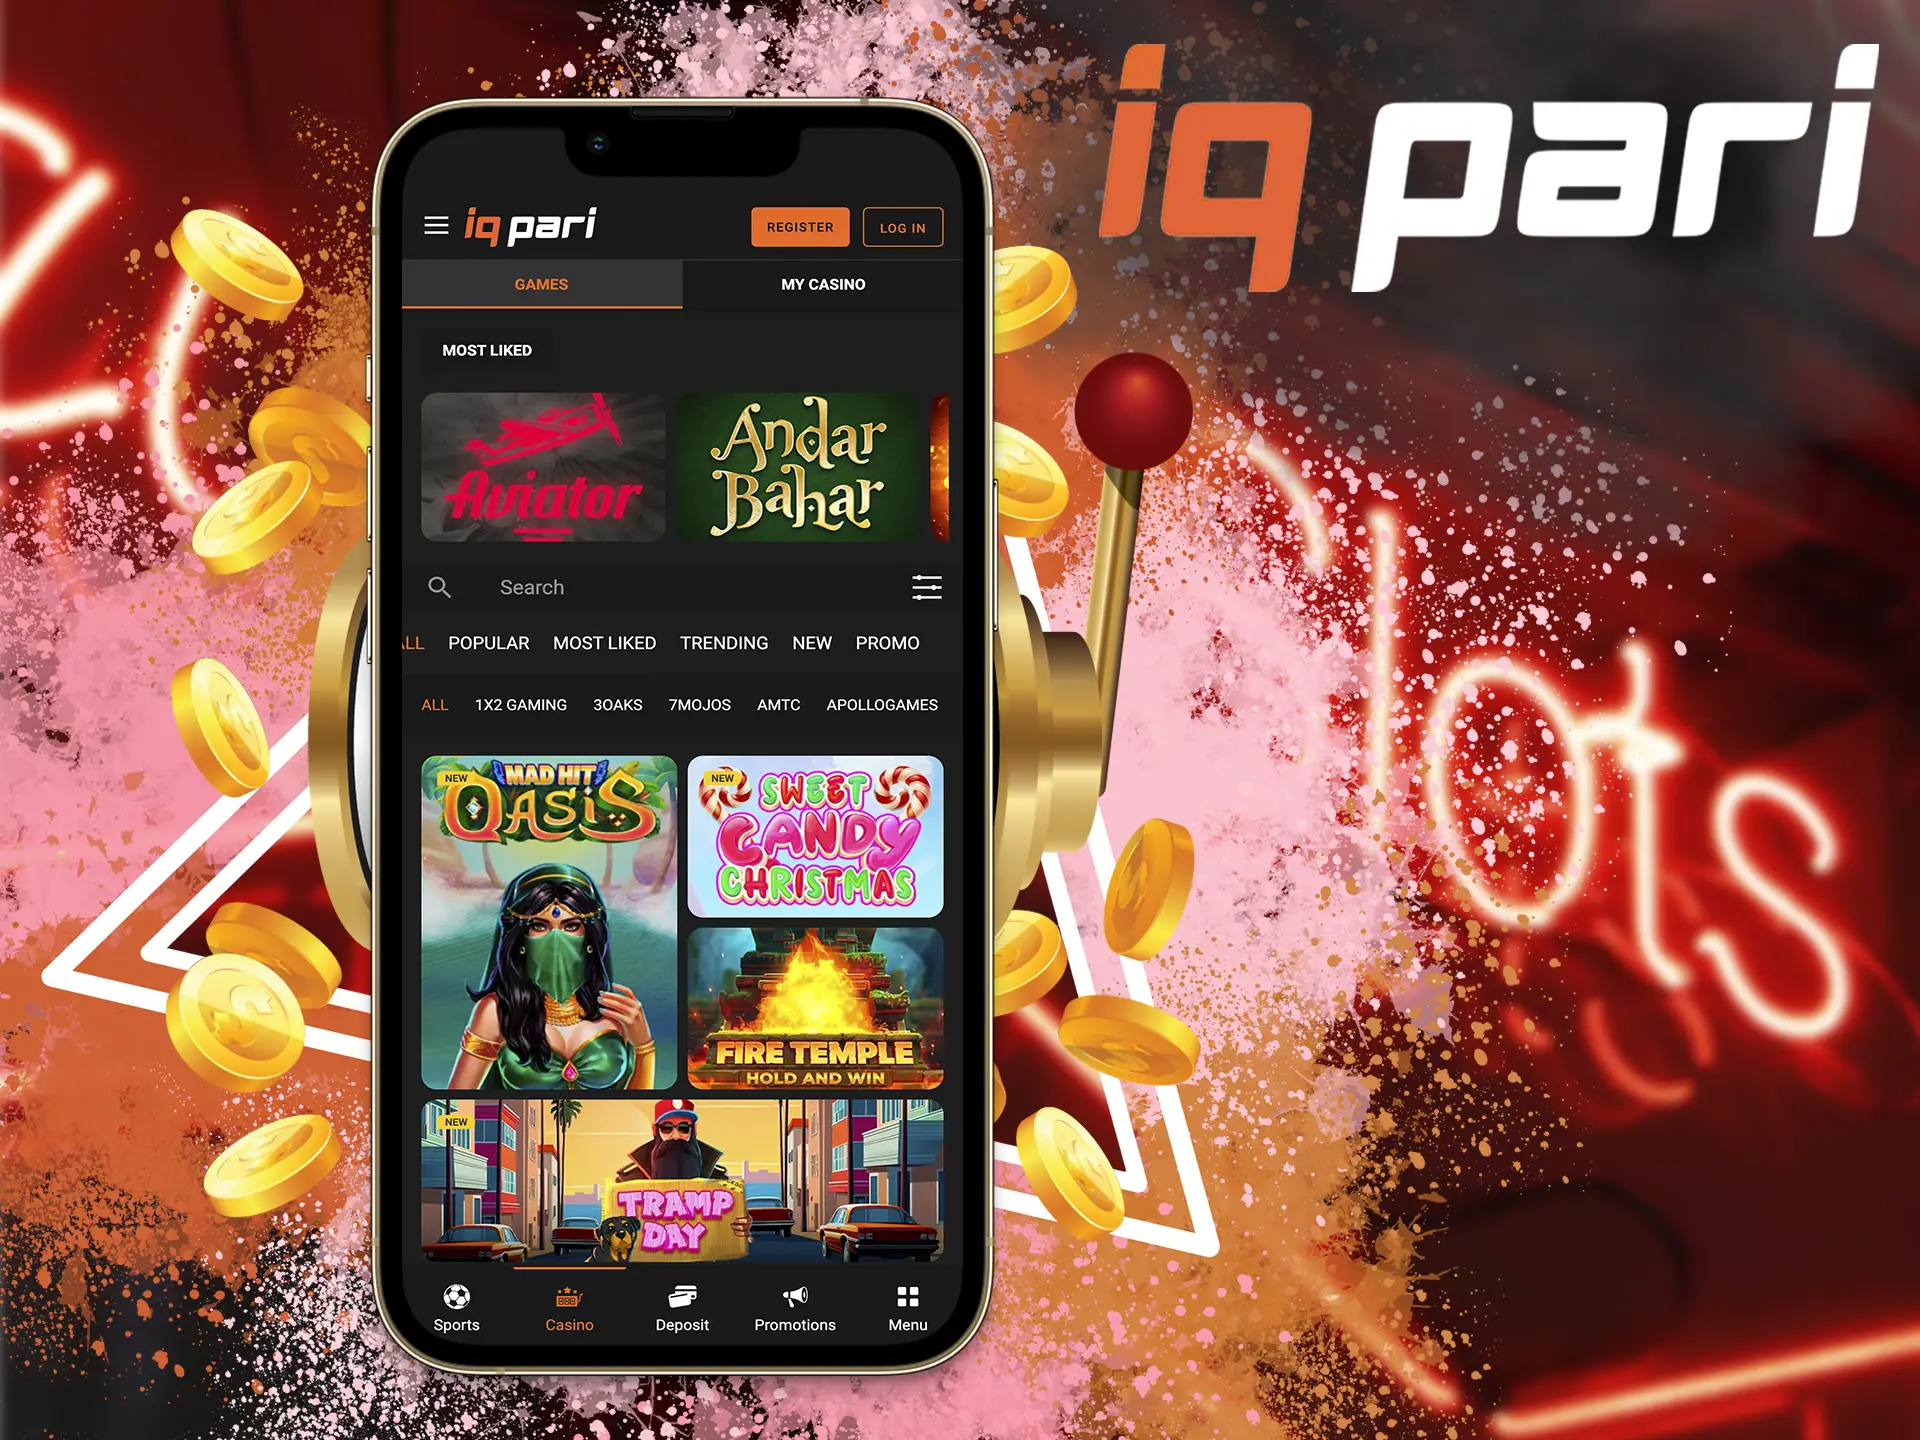 Users from Bangladesh have a unique opportunity to play slot machines on the IQPari.